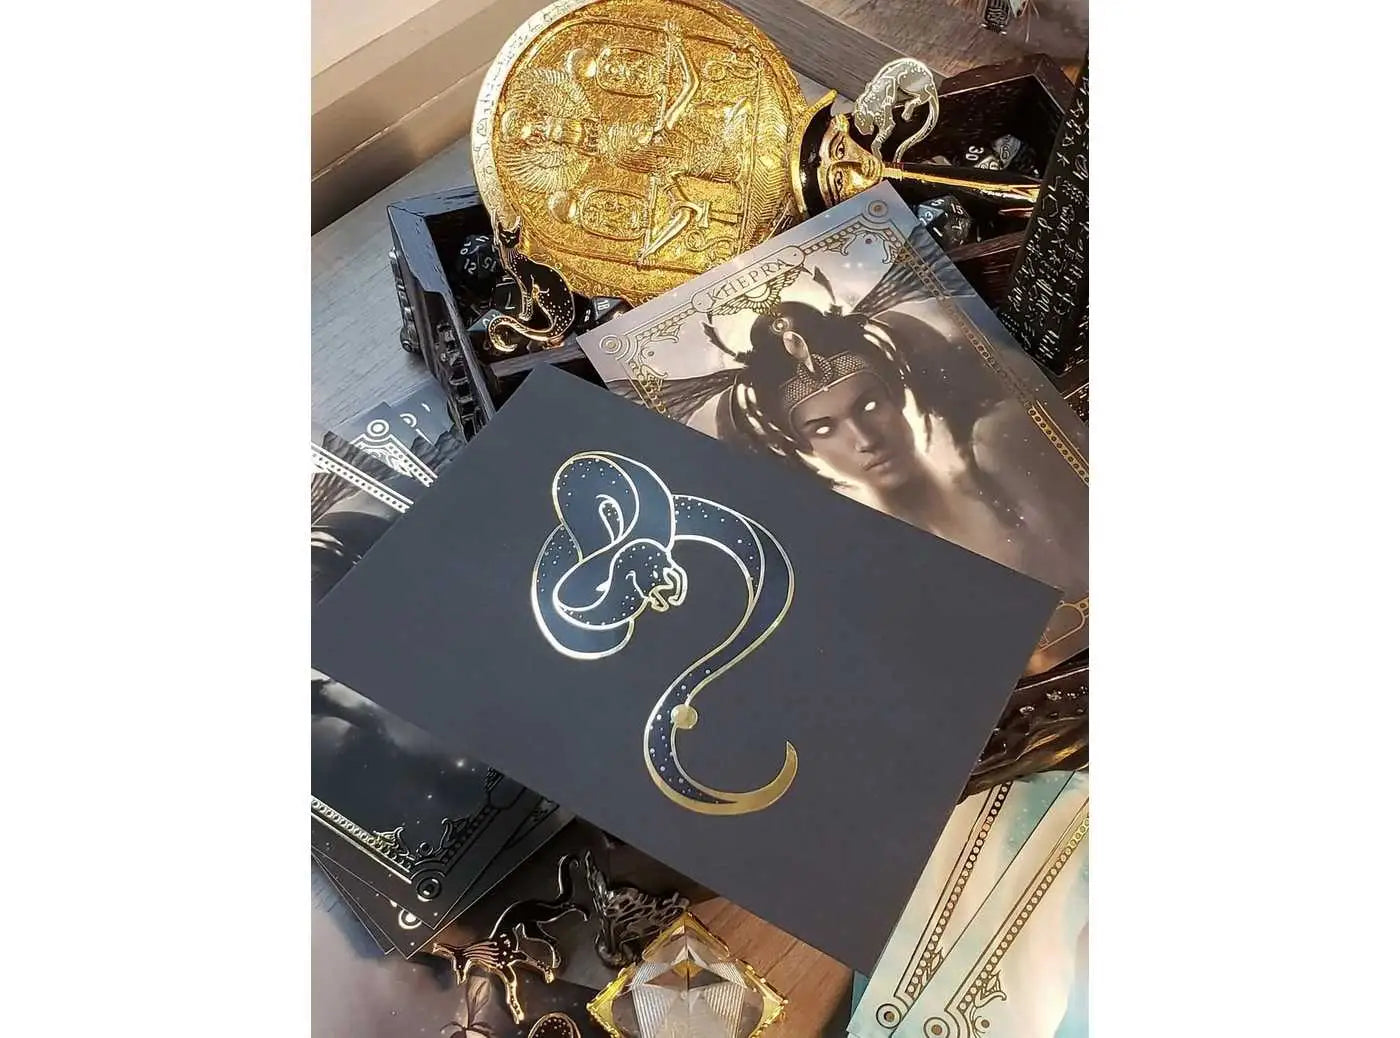 Apep Sticker - Egyptian Stickers - God of Darkness - Egyptian Mythology Gifts - Snake Decal - Planner, Journal • Gold Foil Metallic Chrome